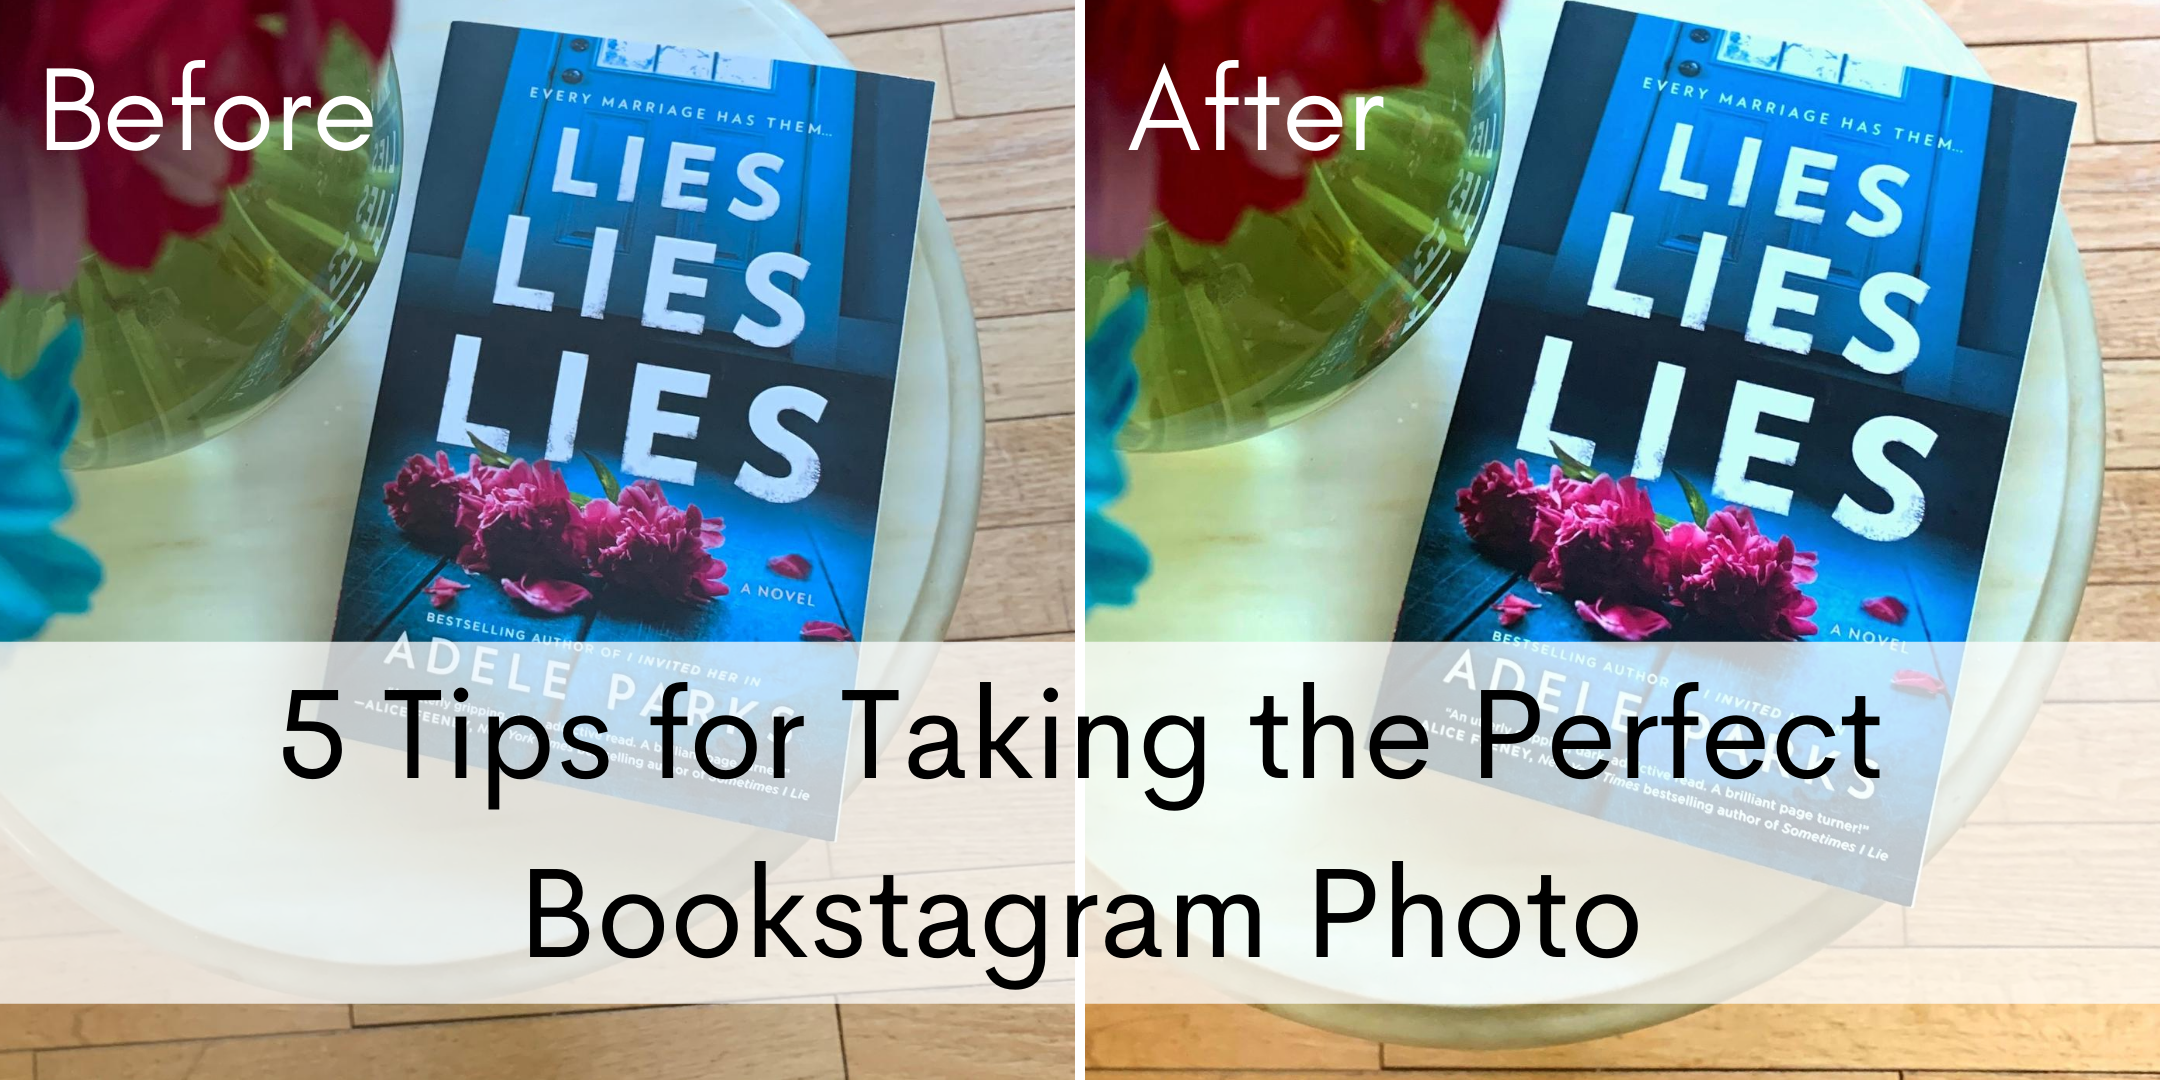 5 Tips For Taking the Perfect Bookstagram Photo